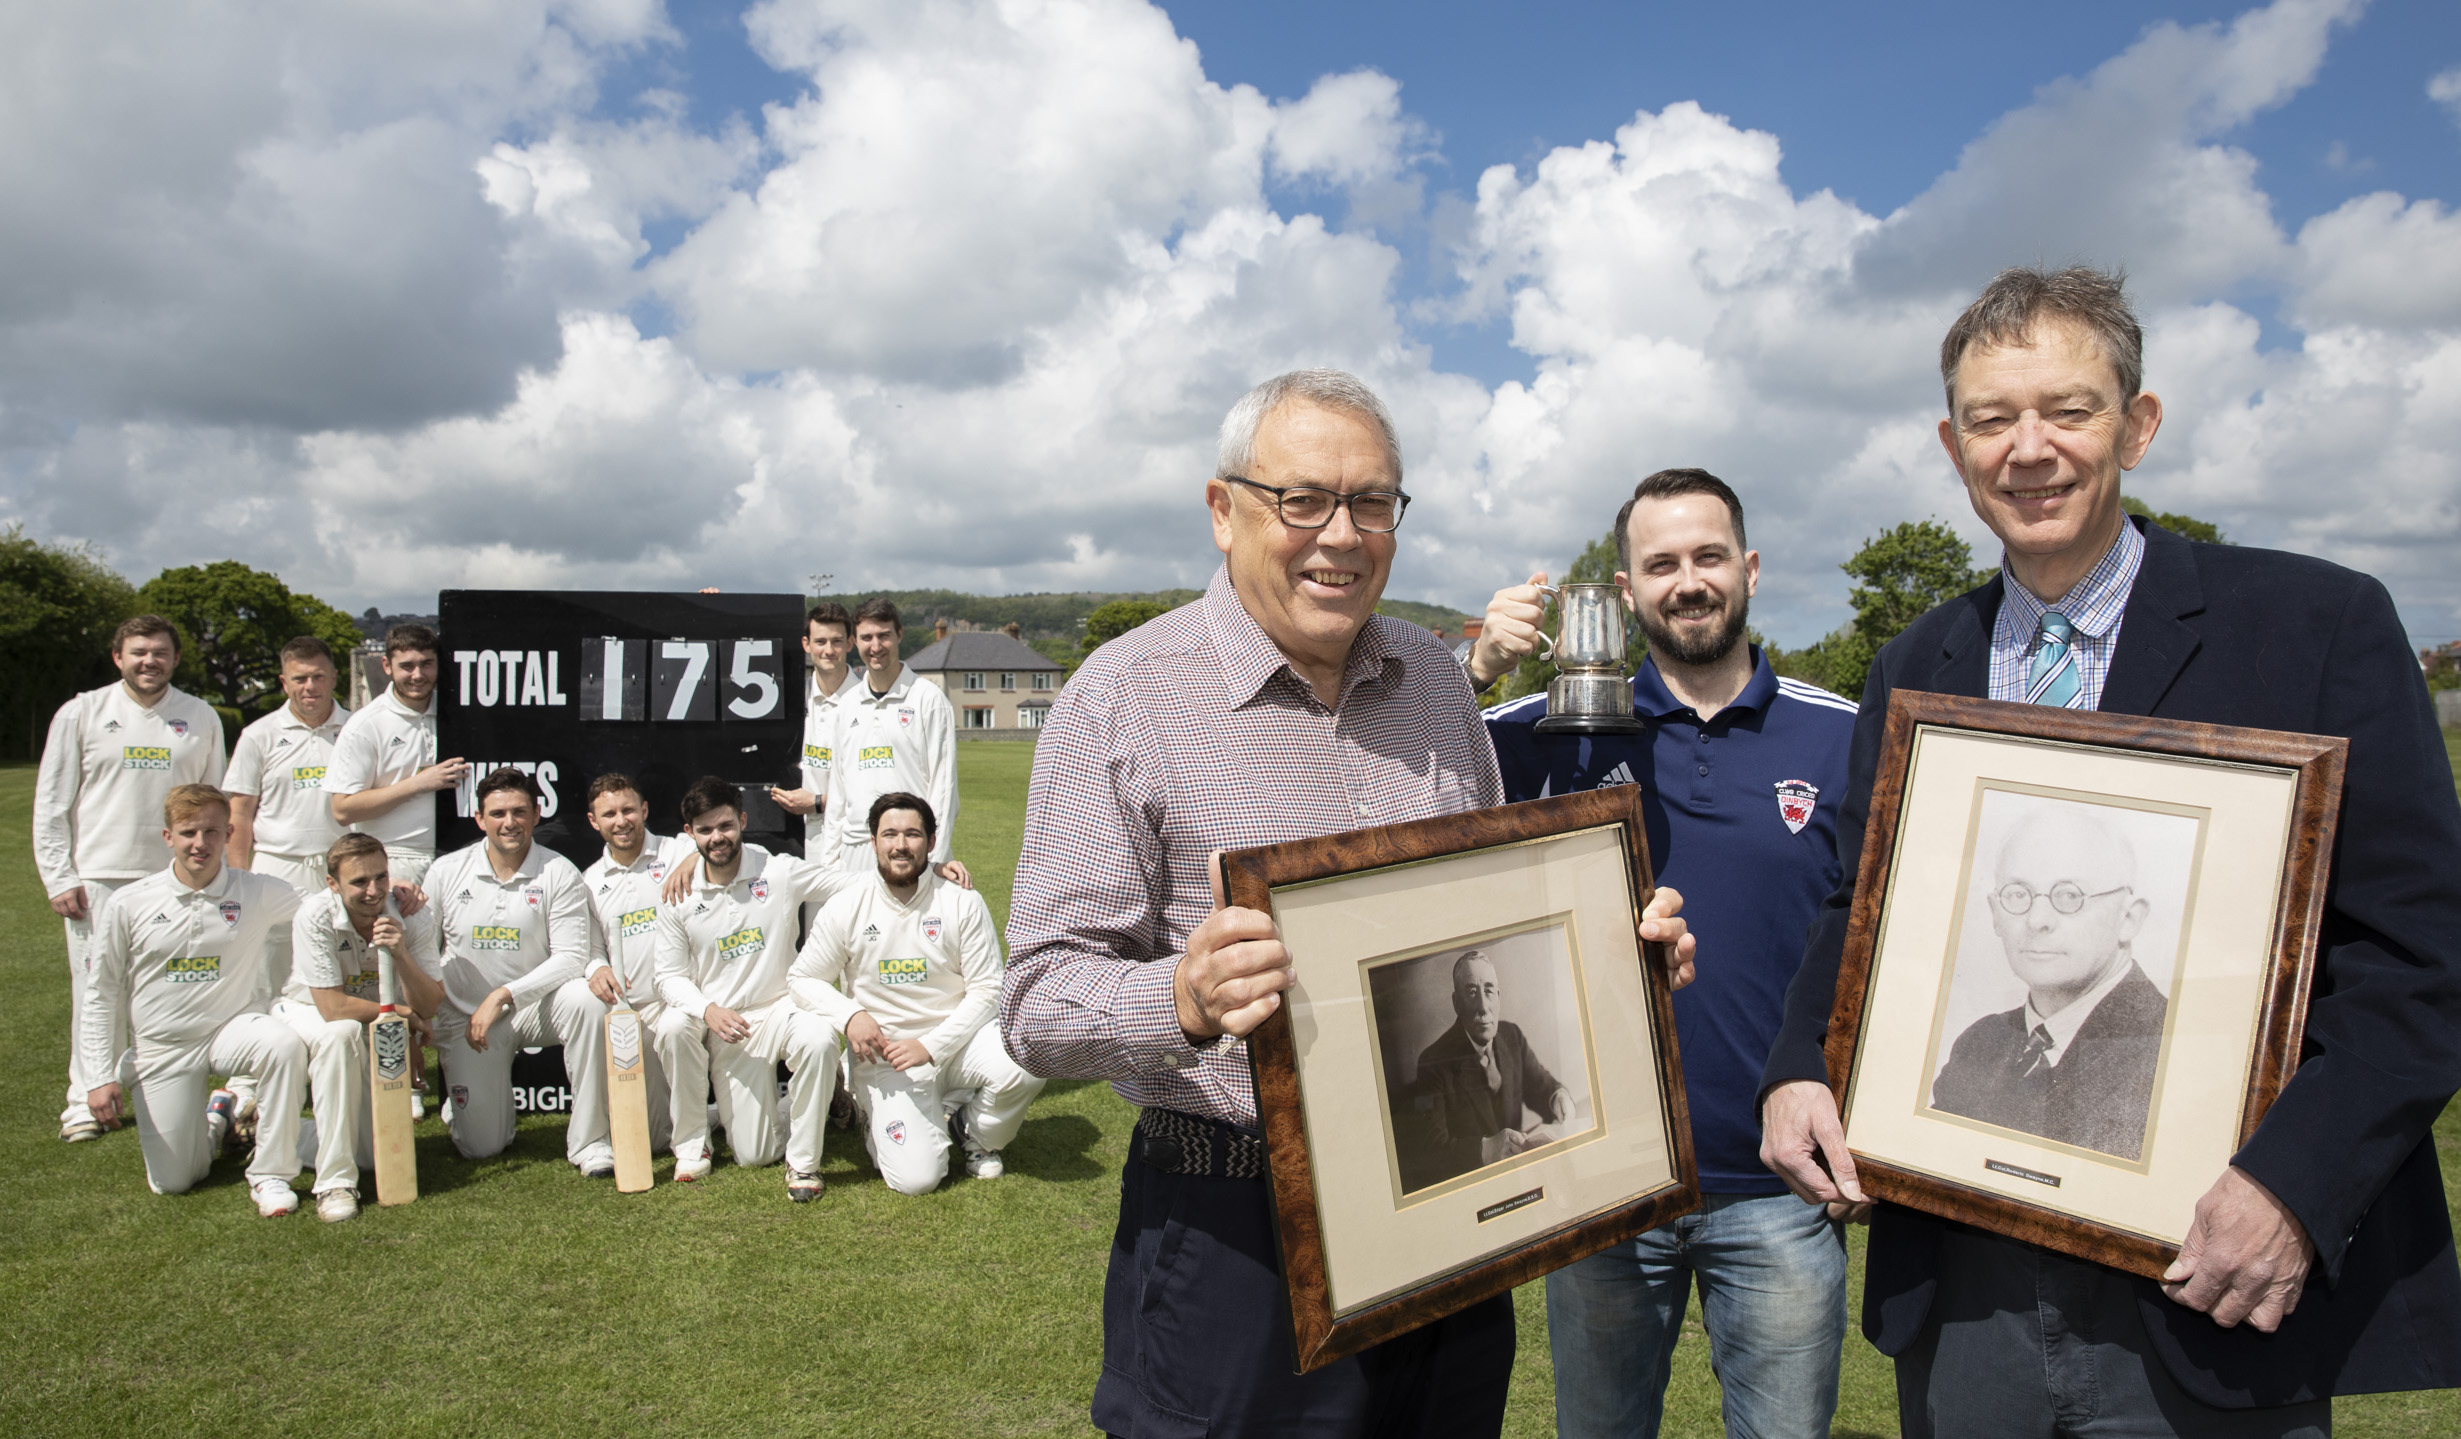 Historic cricket club discovers W G Grace link as it celebrates 175 years